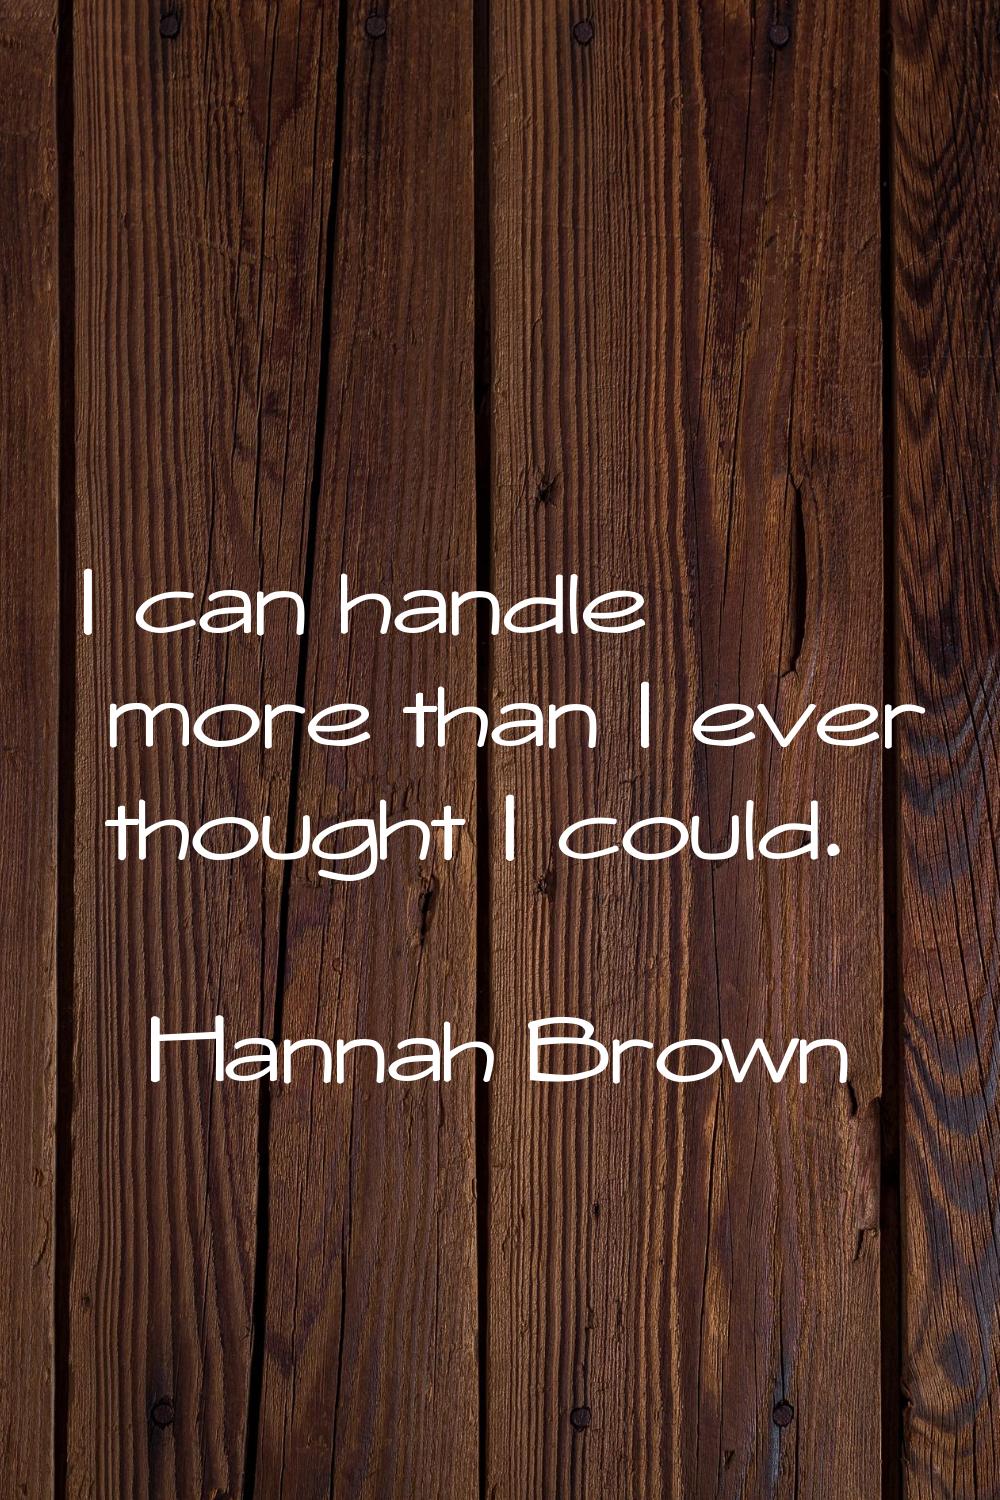 I can handle more than I ever thought I could.